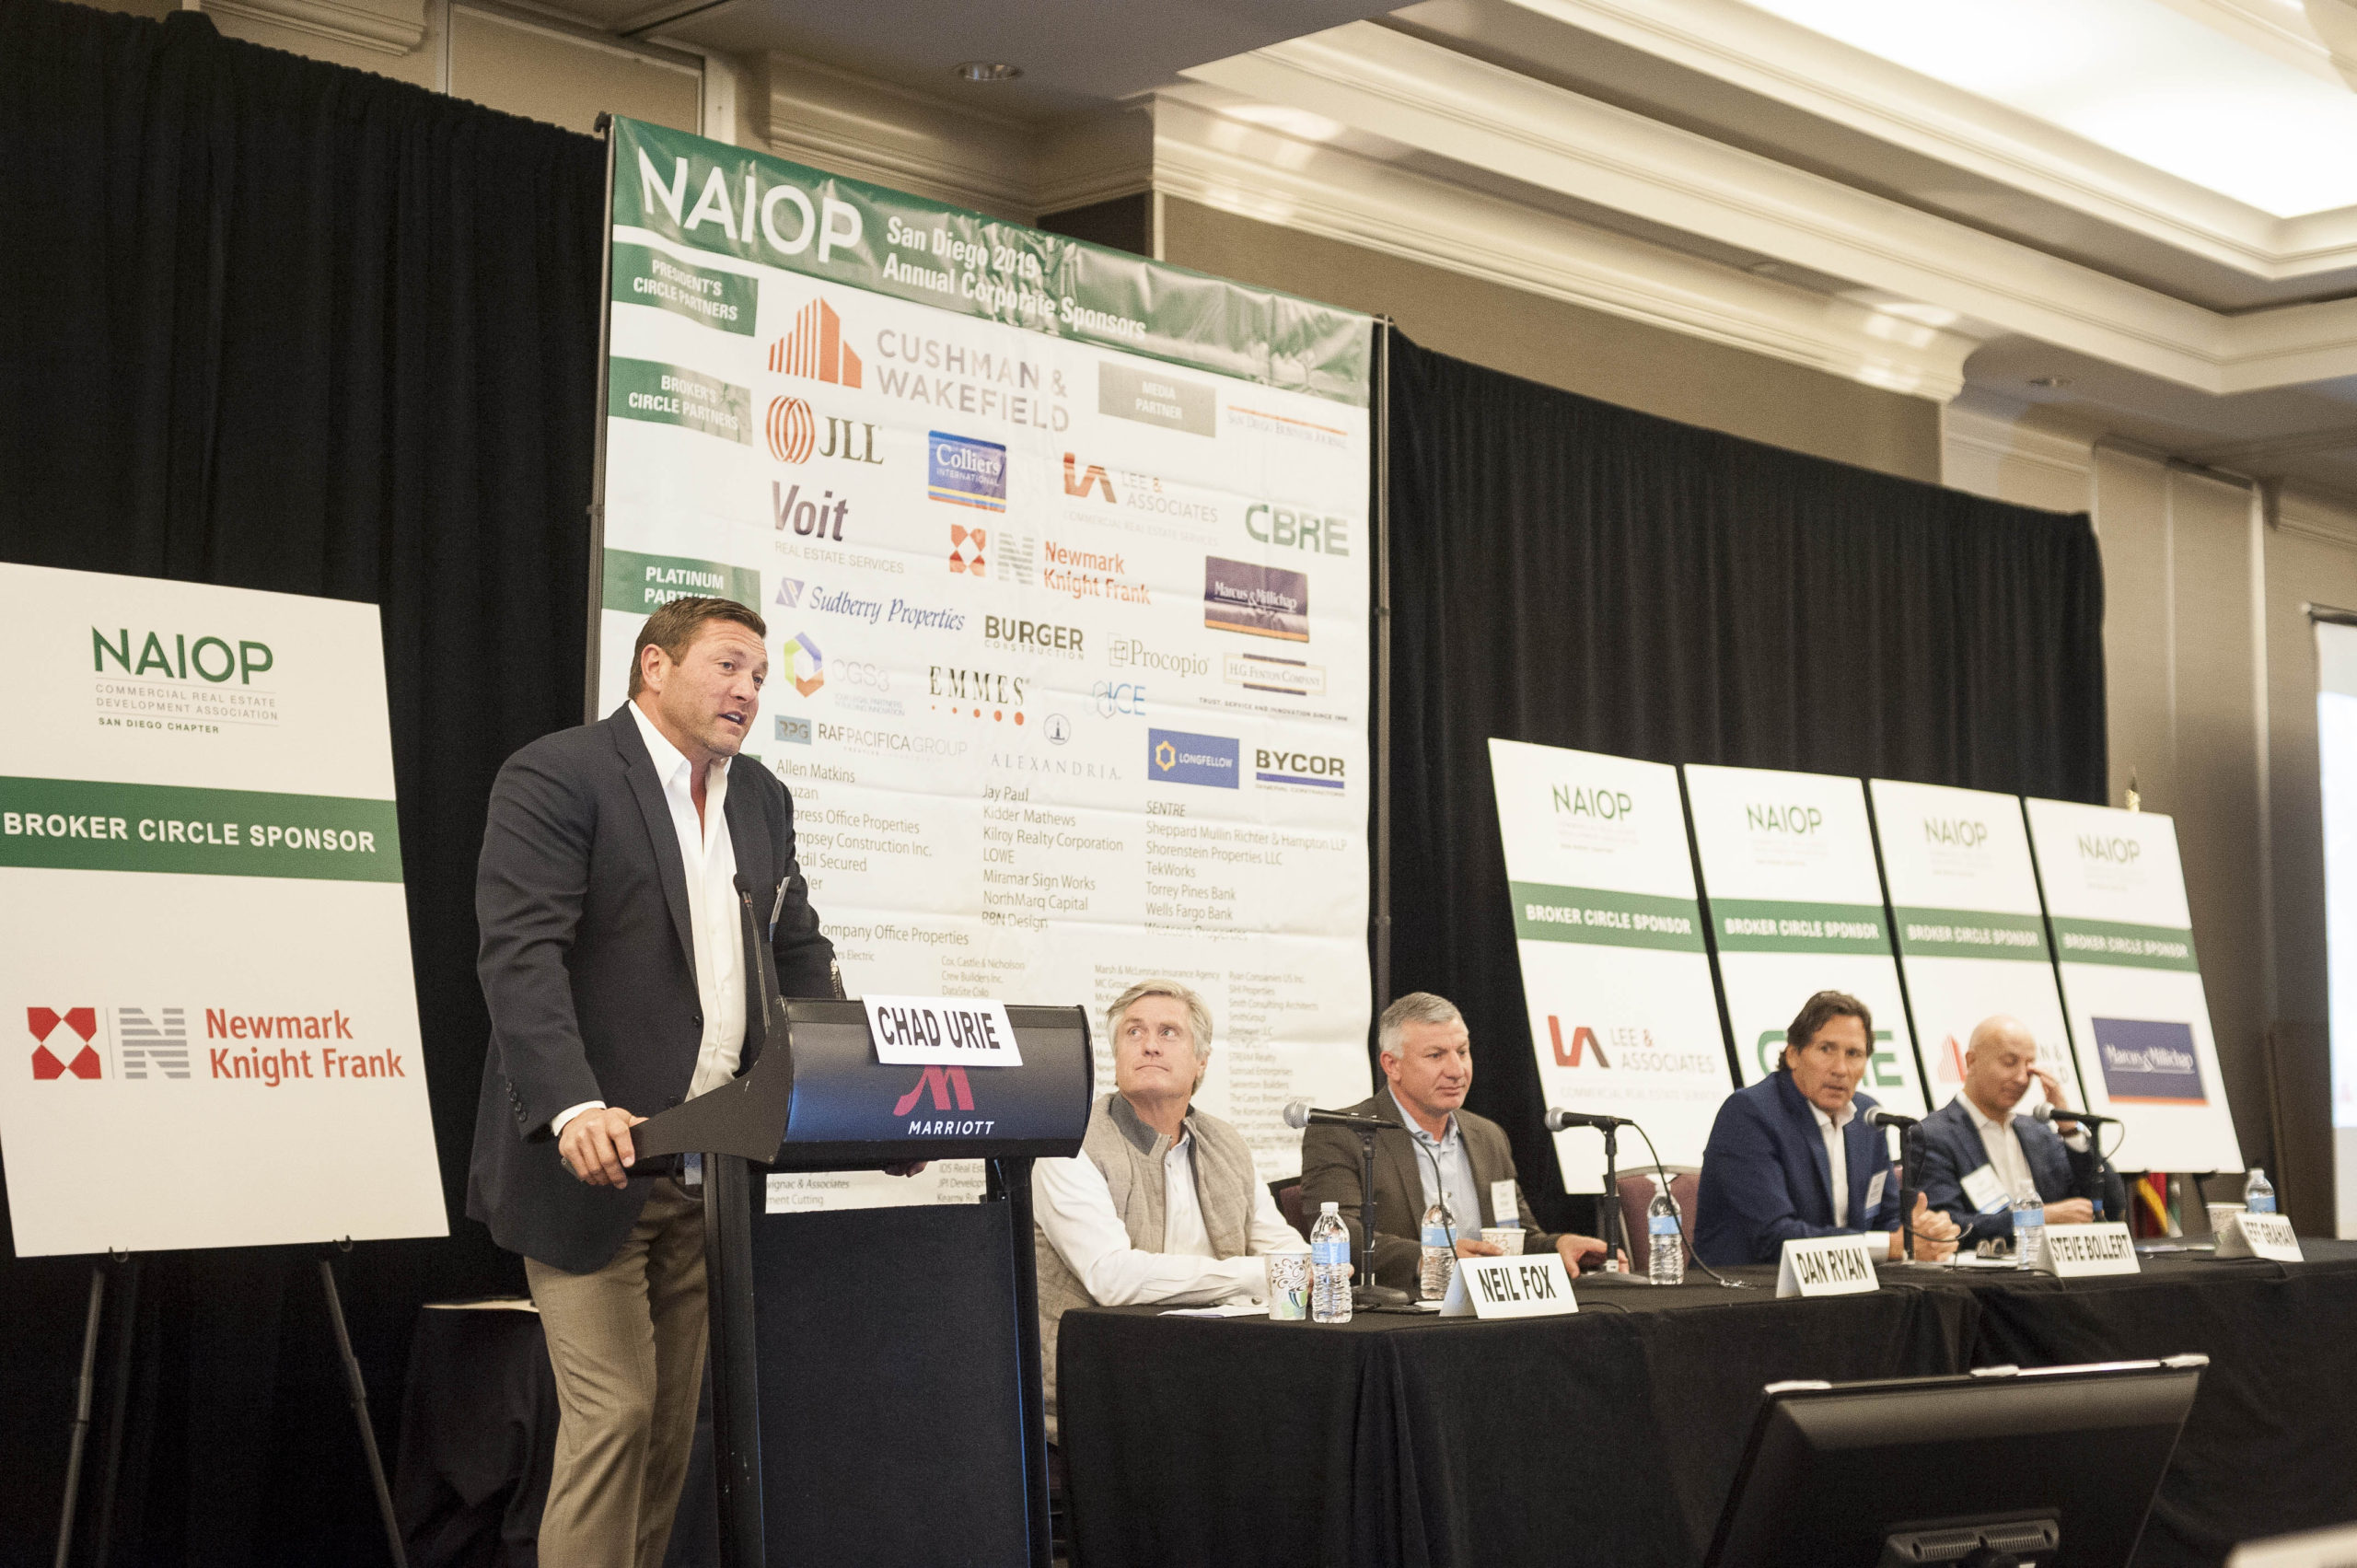 leading-life-science-real-estate-developers-speaking-at-naiop-event-share-opportunities-and-challenges-facing-local-market